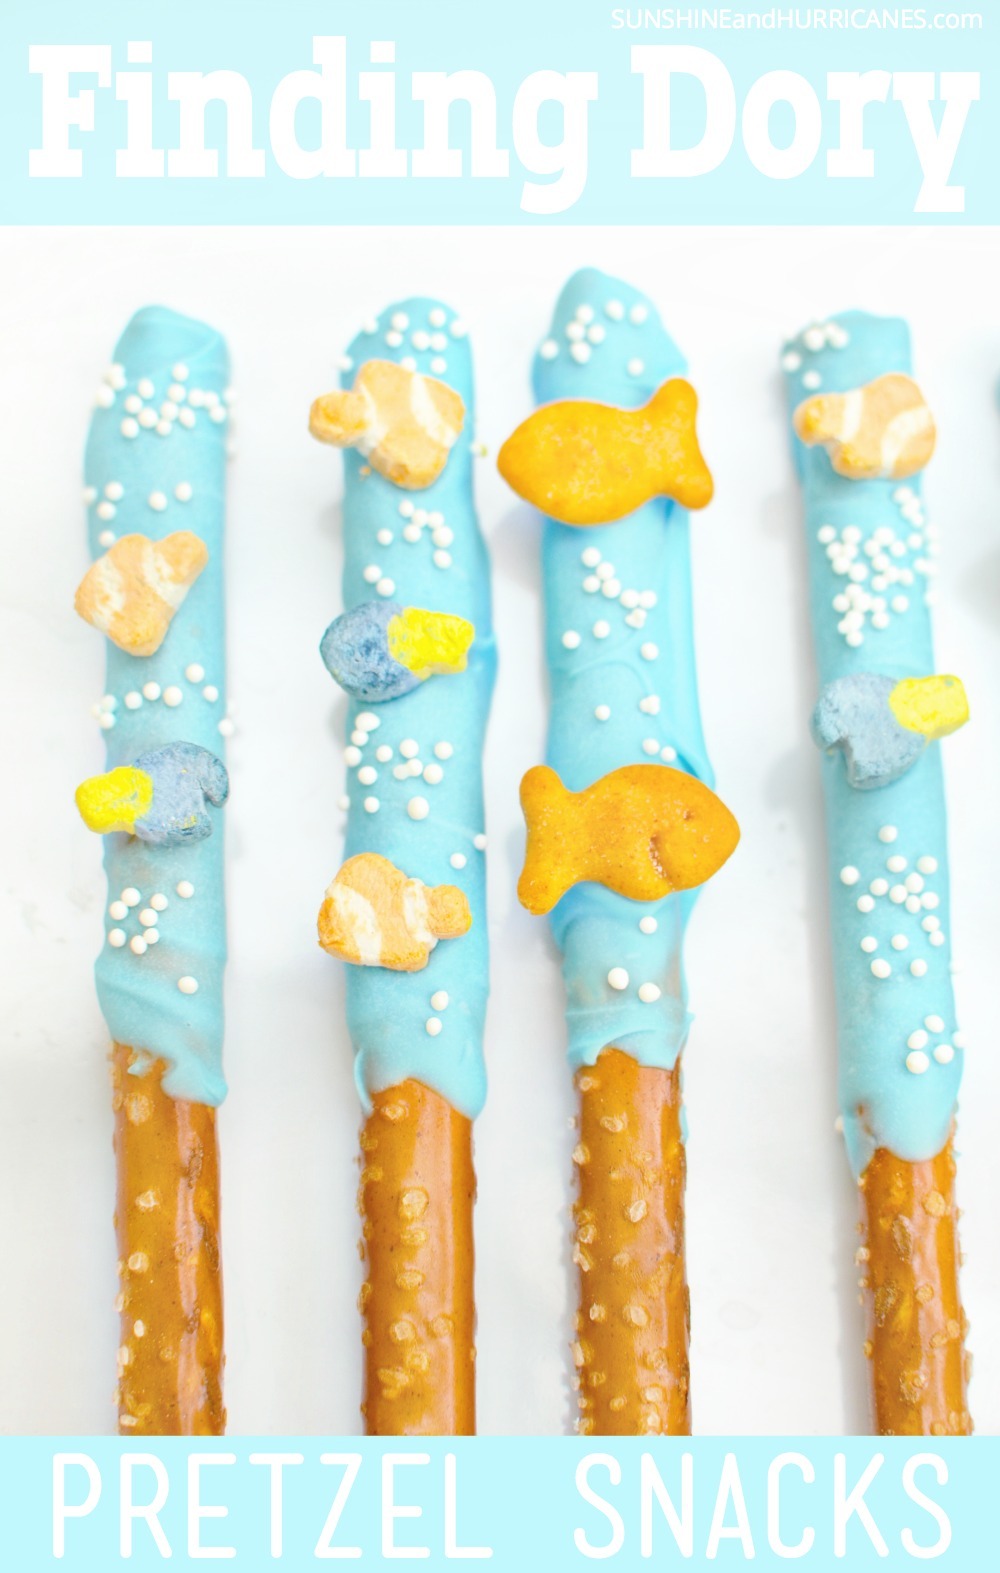 Planning a Finding Dory Birthday Party? These adorable dipped pretzel rods with their under the sea theme would be a perfect party snack! They would also work for a Finding Nemo Party, An Under the Sea Party or even just a pool party. Simple to make, fun to eat, kids will love them. Finding Dory Snacks from SunshineandHurricanes.com